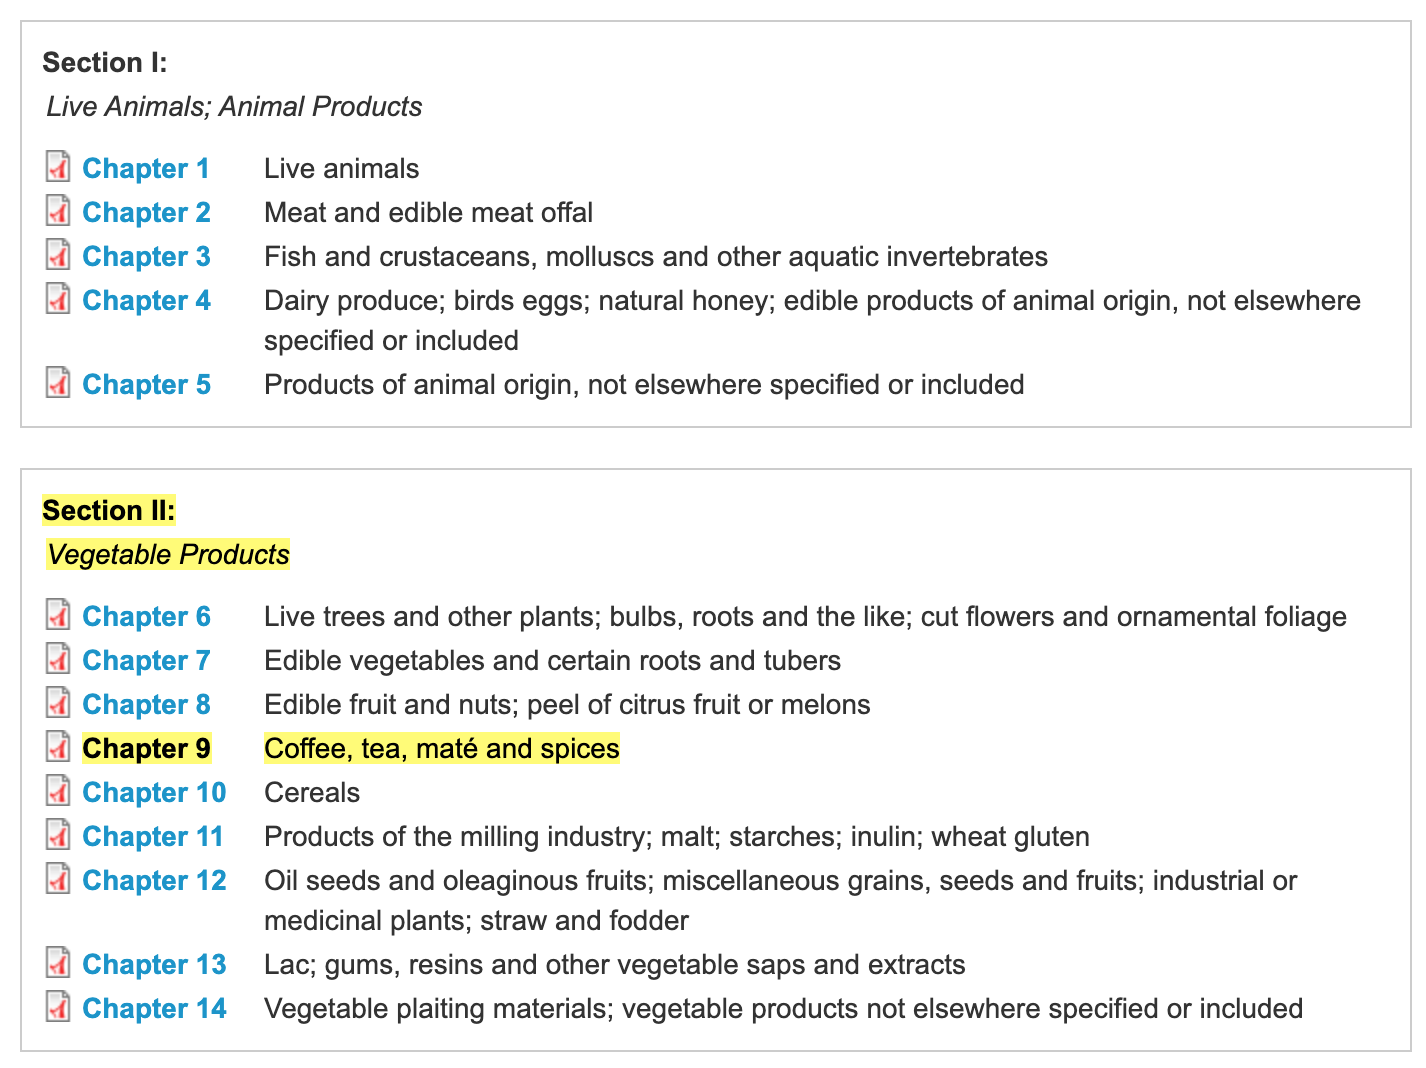 List of chapters to find HTS codes for animal and vegetable products